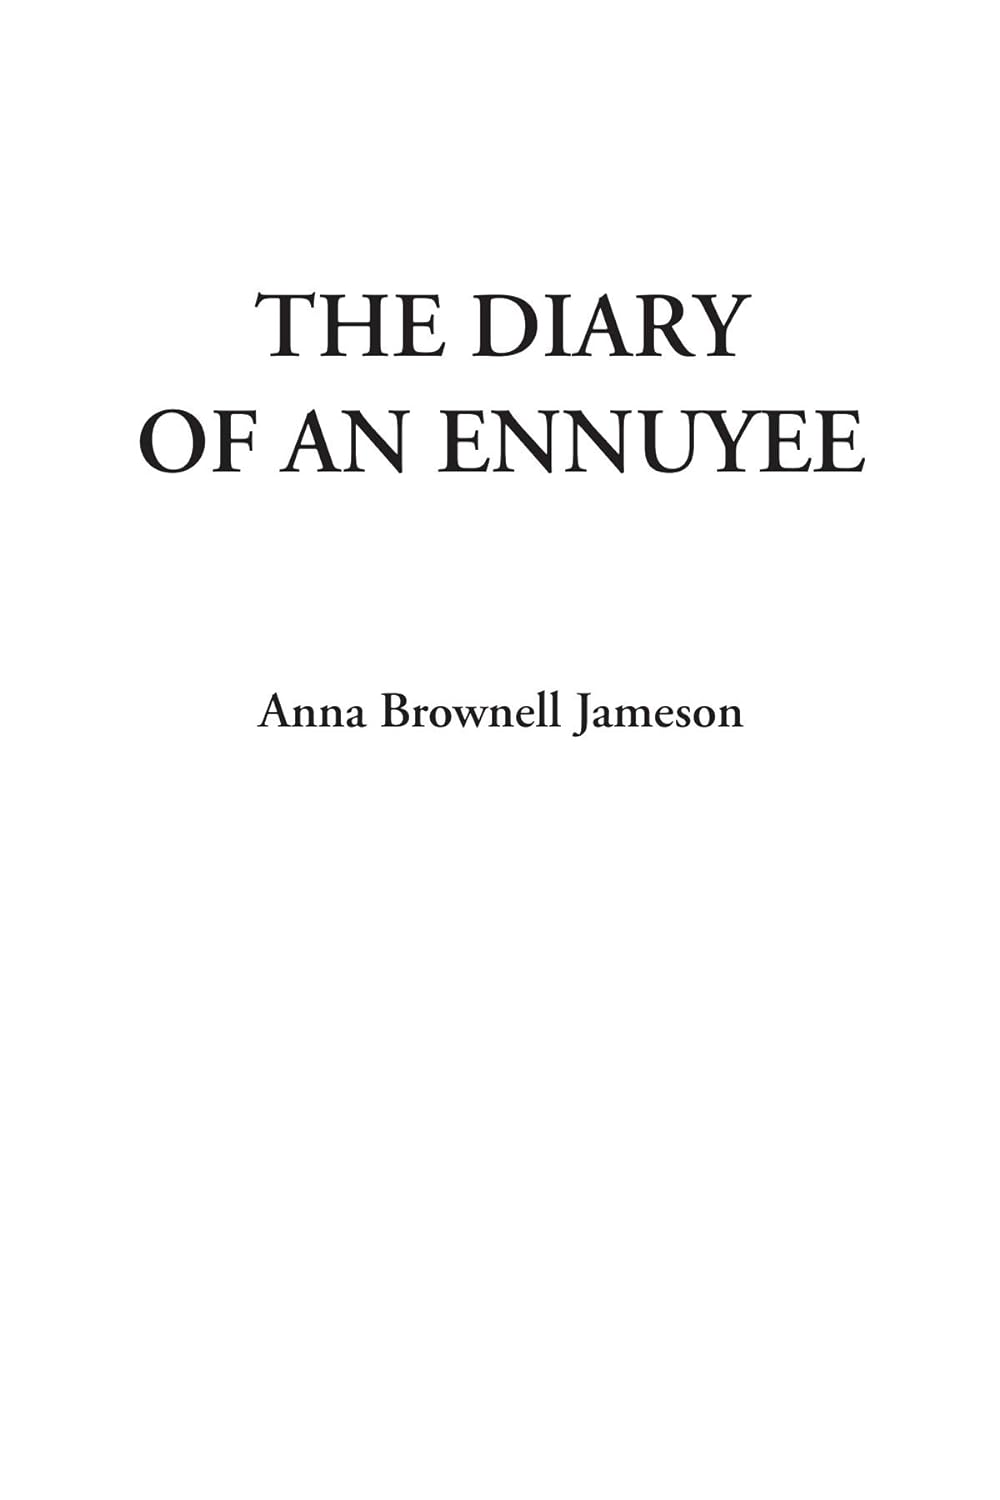 The Diary of an Ennuyee - Anna Brownell Jameson